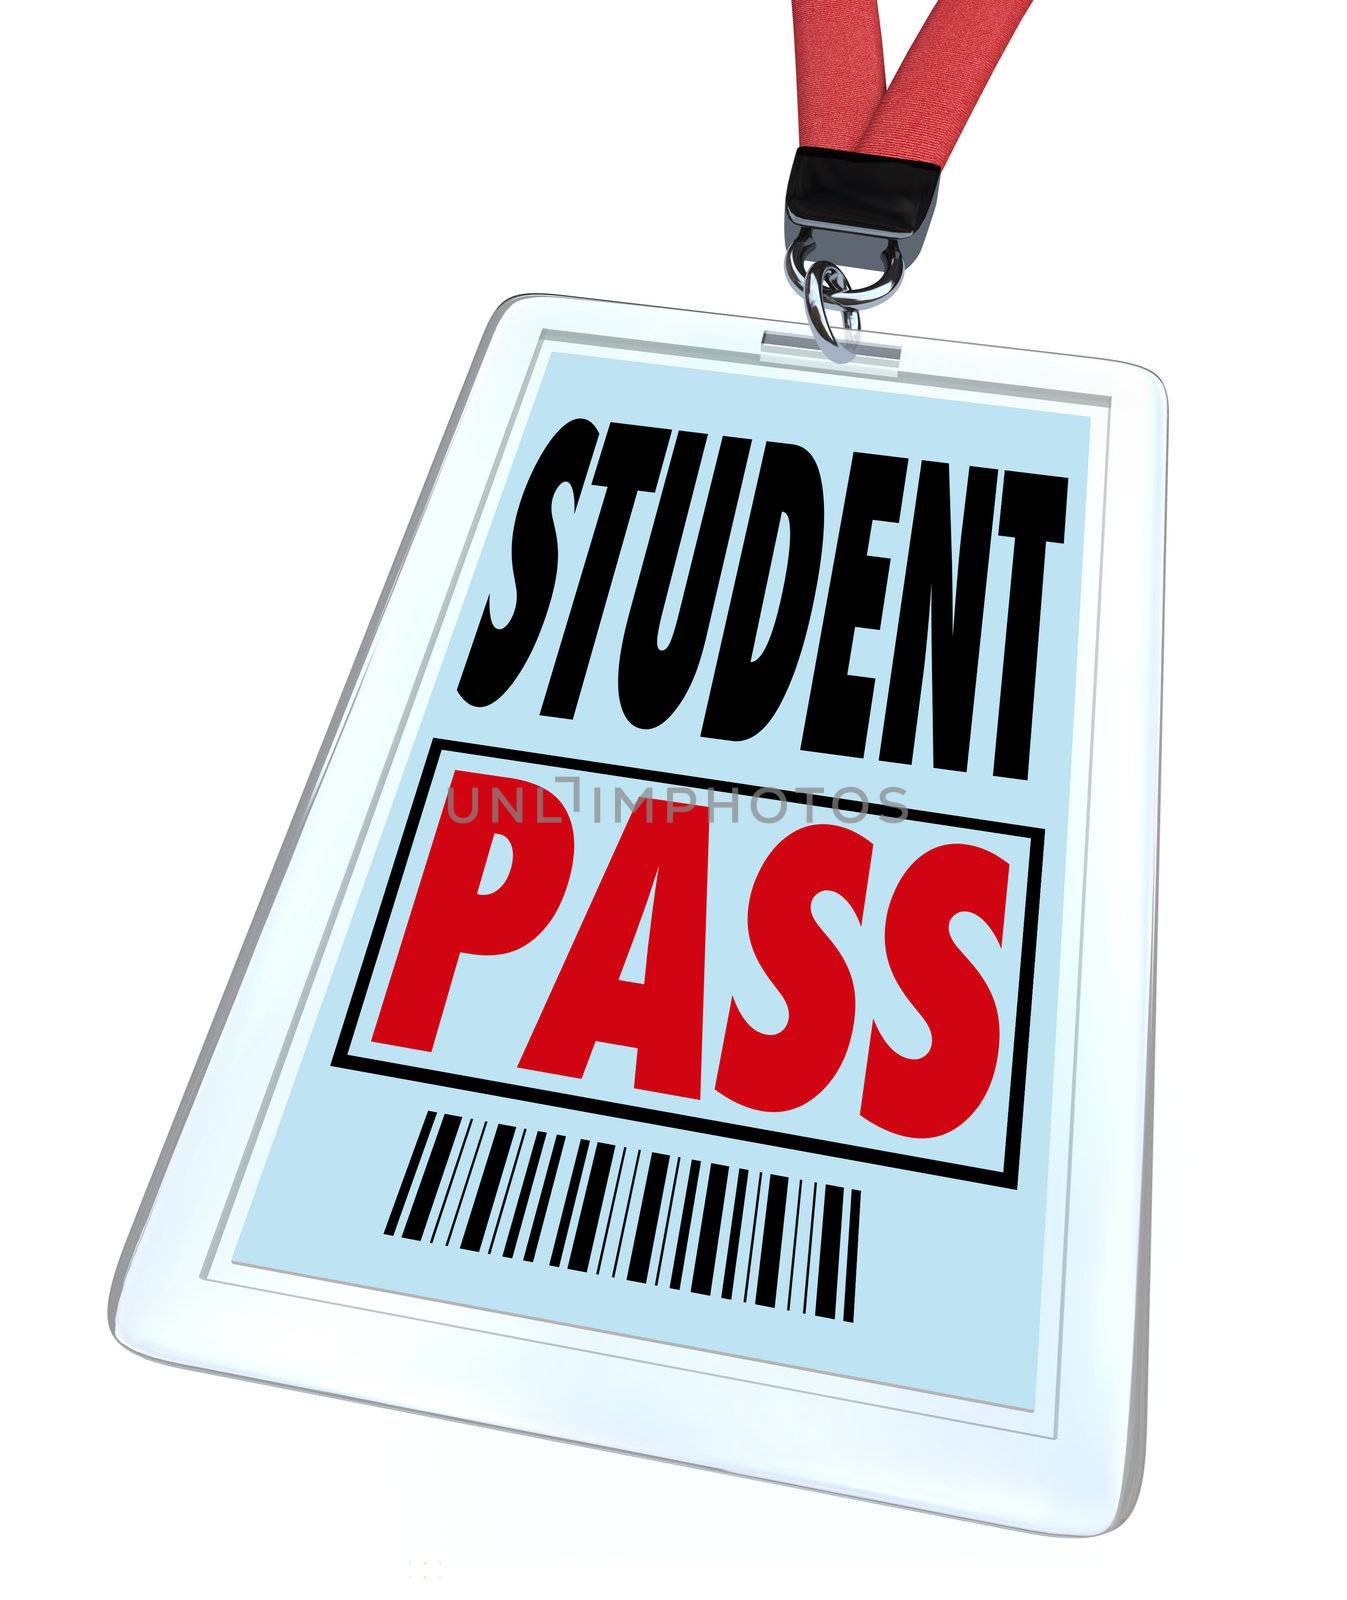 A student pass in badge holder and with lanyard that a school pupil would wear on a special event or field trip for educational purposes